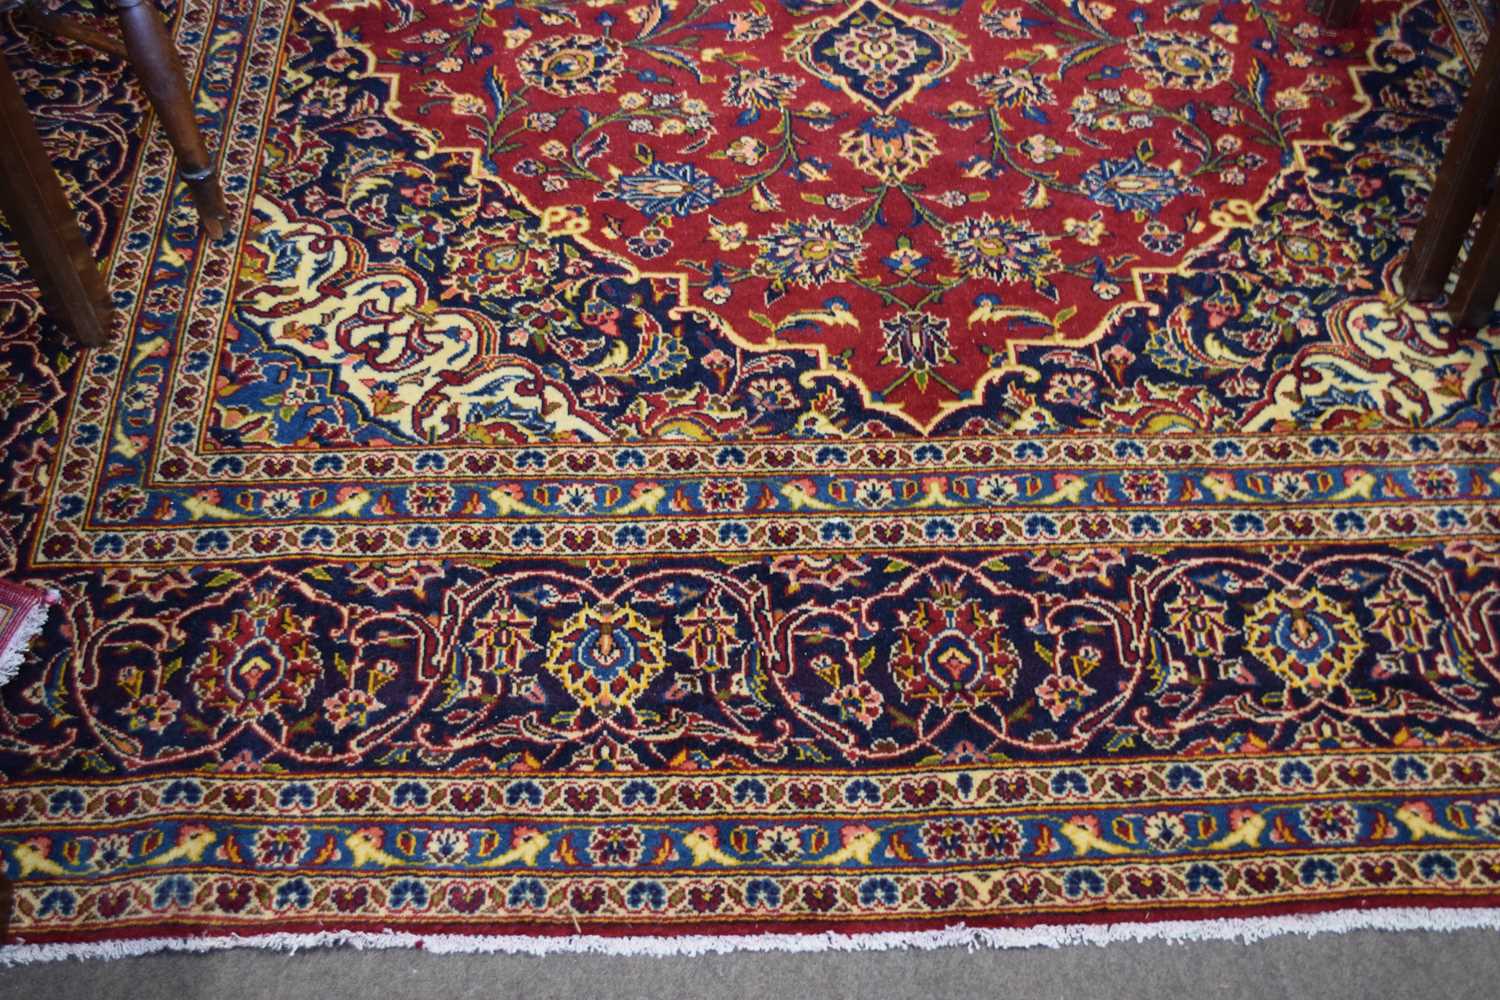 Large Kashan wool floor rug decorated with a large central red and blue panel surrounded by a floral - Image 3 of 3